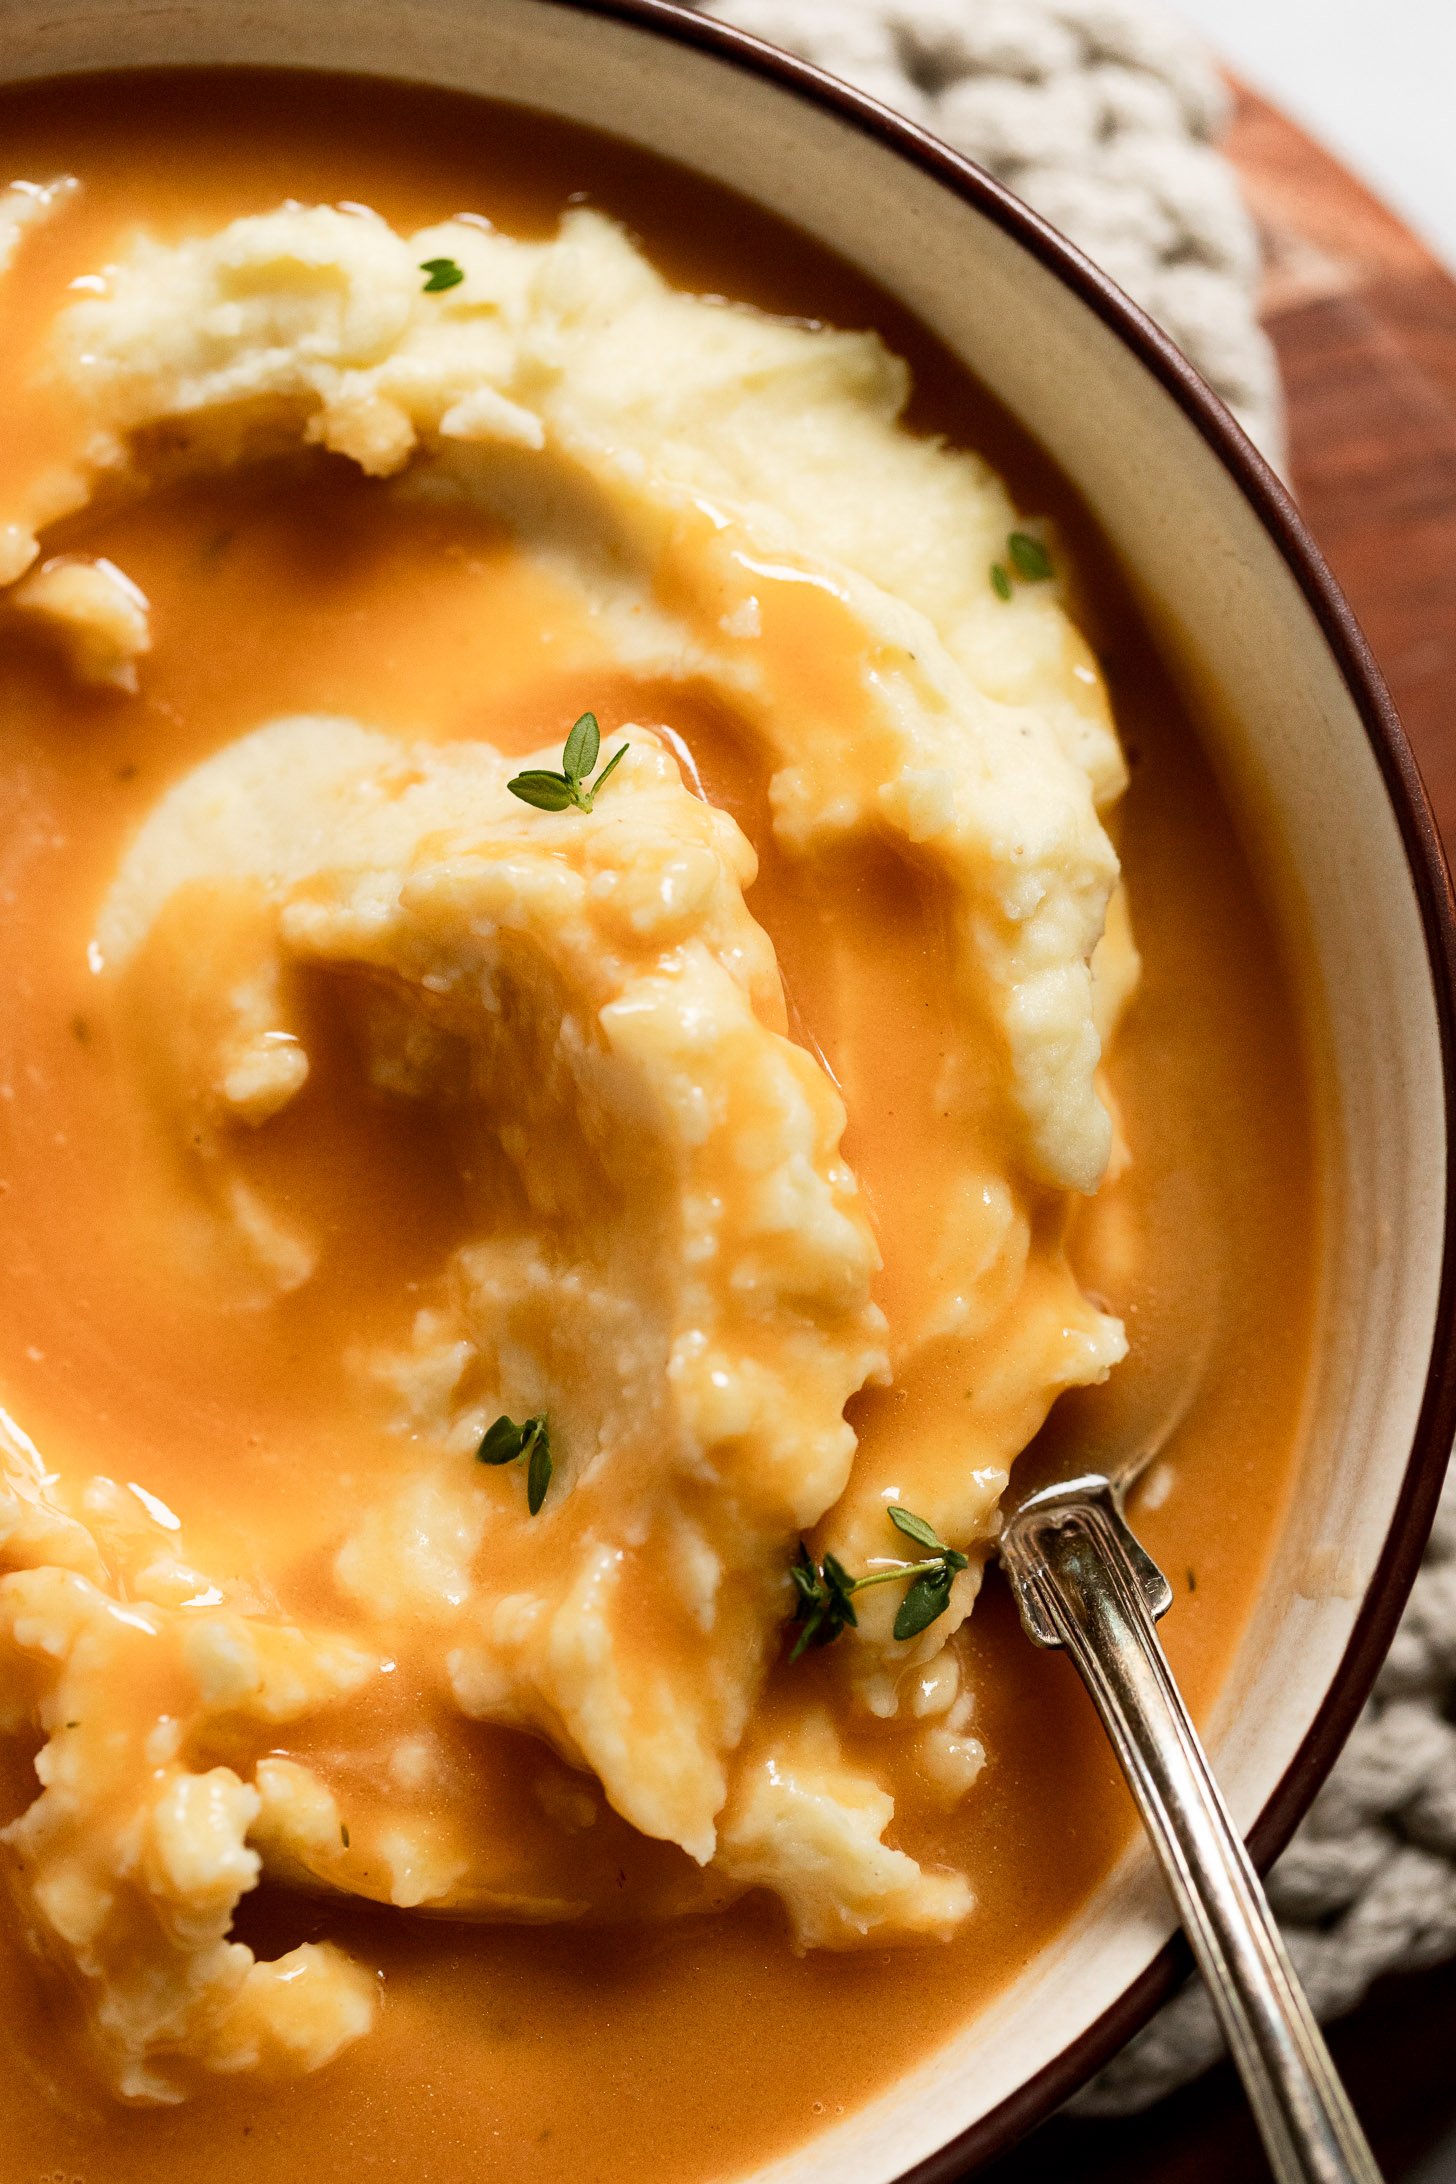 Bowl of mashed potatoes with vegetarian gravy and fresh thyme.